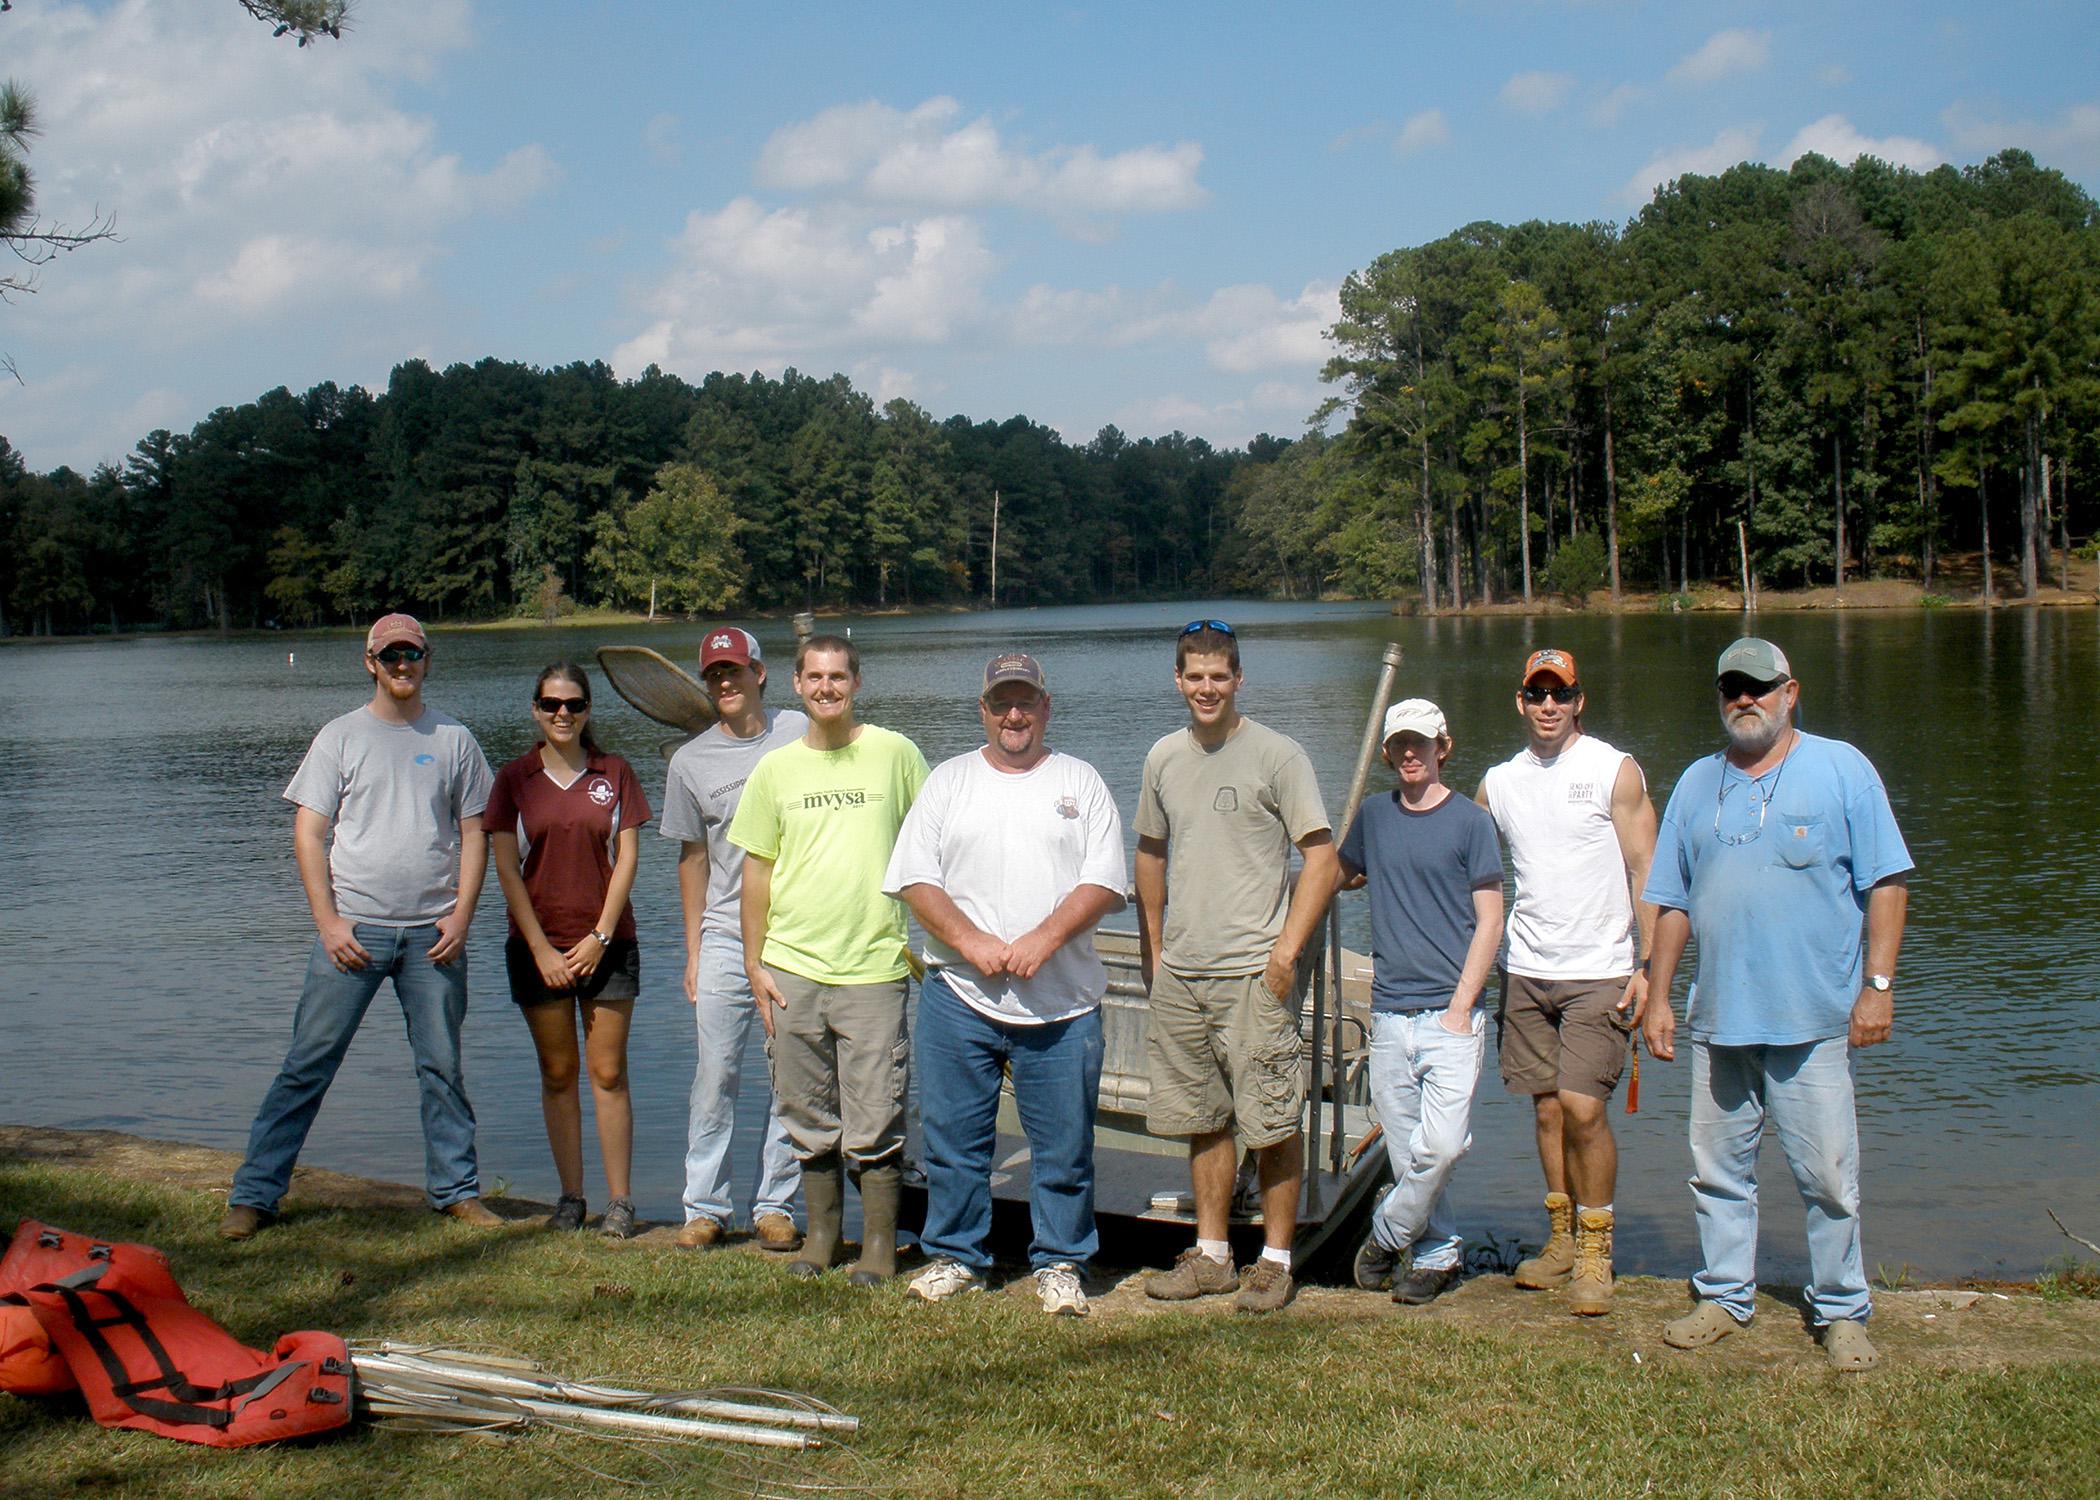 Mississippi State University students Thad Moody, Caroline Andrews, Trae Foster, Edward Entsminger, Dan Goetz, Bryant Haley and Alex Elkins prepare to sample the fish population in Larry Coleman and George Abrams' fishing pond. The students are members of MSU's chapter of the American Fisheries Society, which received the 2012 Outstanding Subunit Award during the AFS's regional meeting. (Photo courtesy of Caroline Andrews)